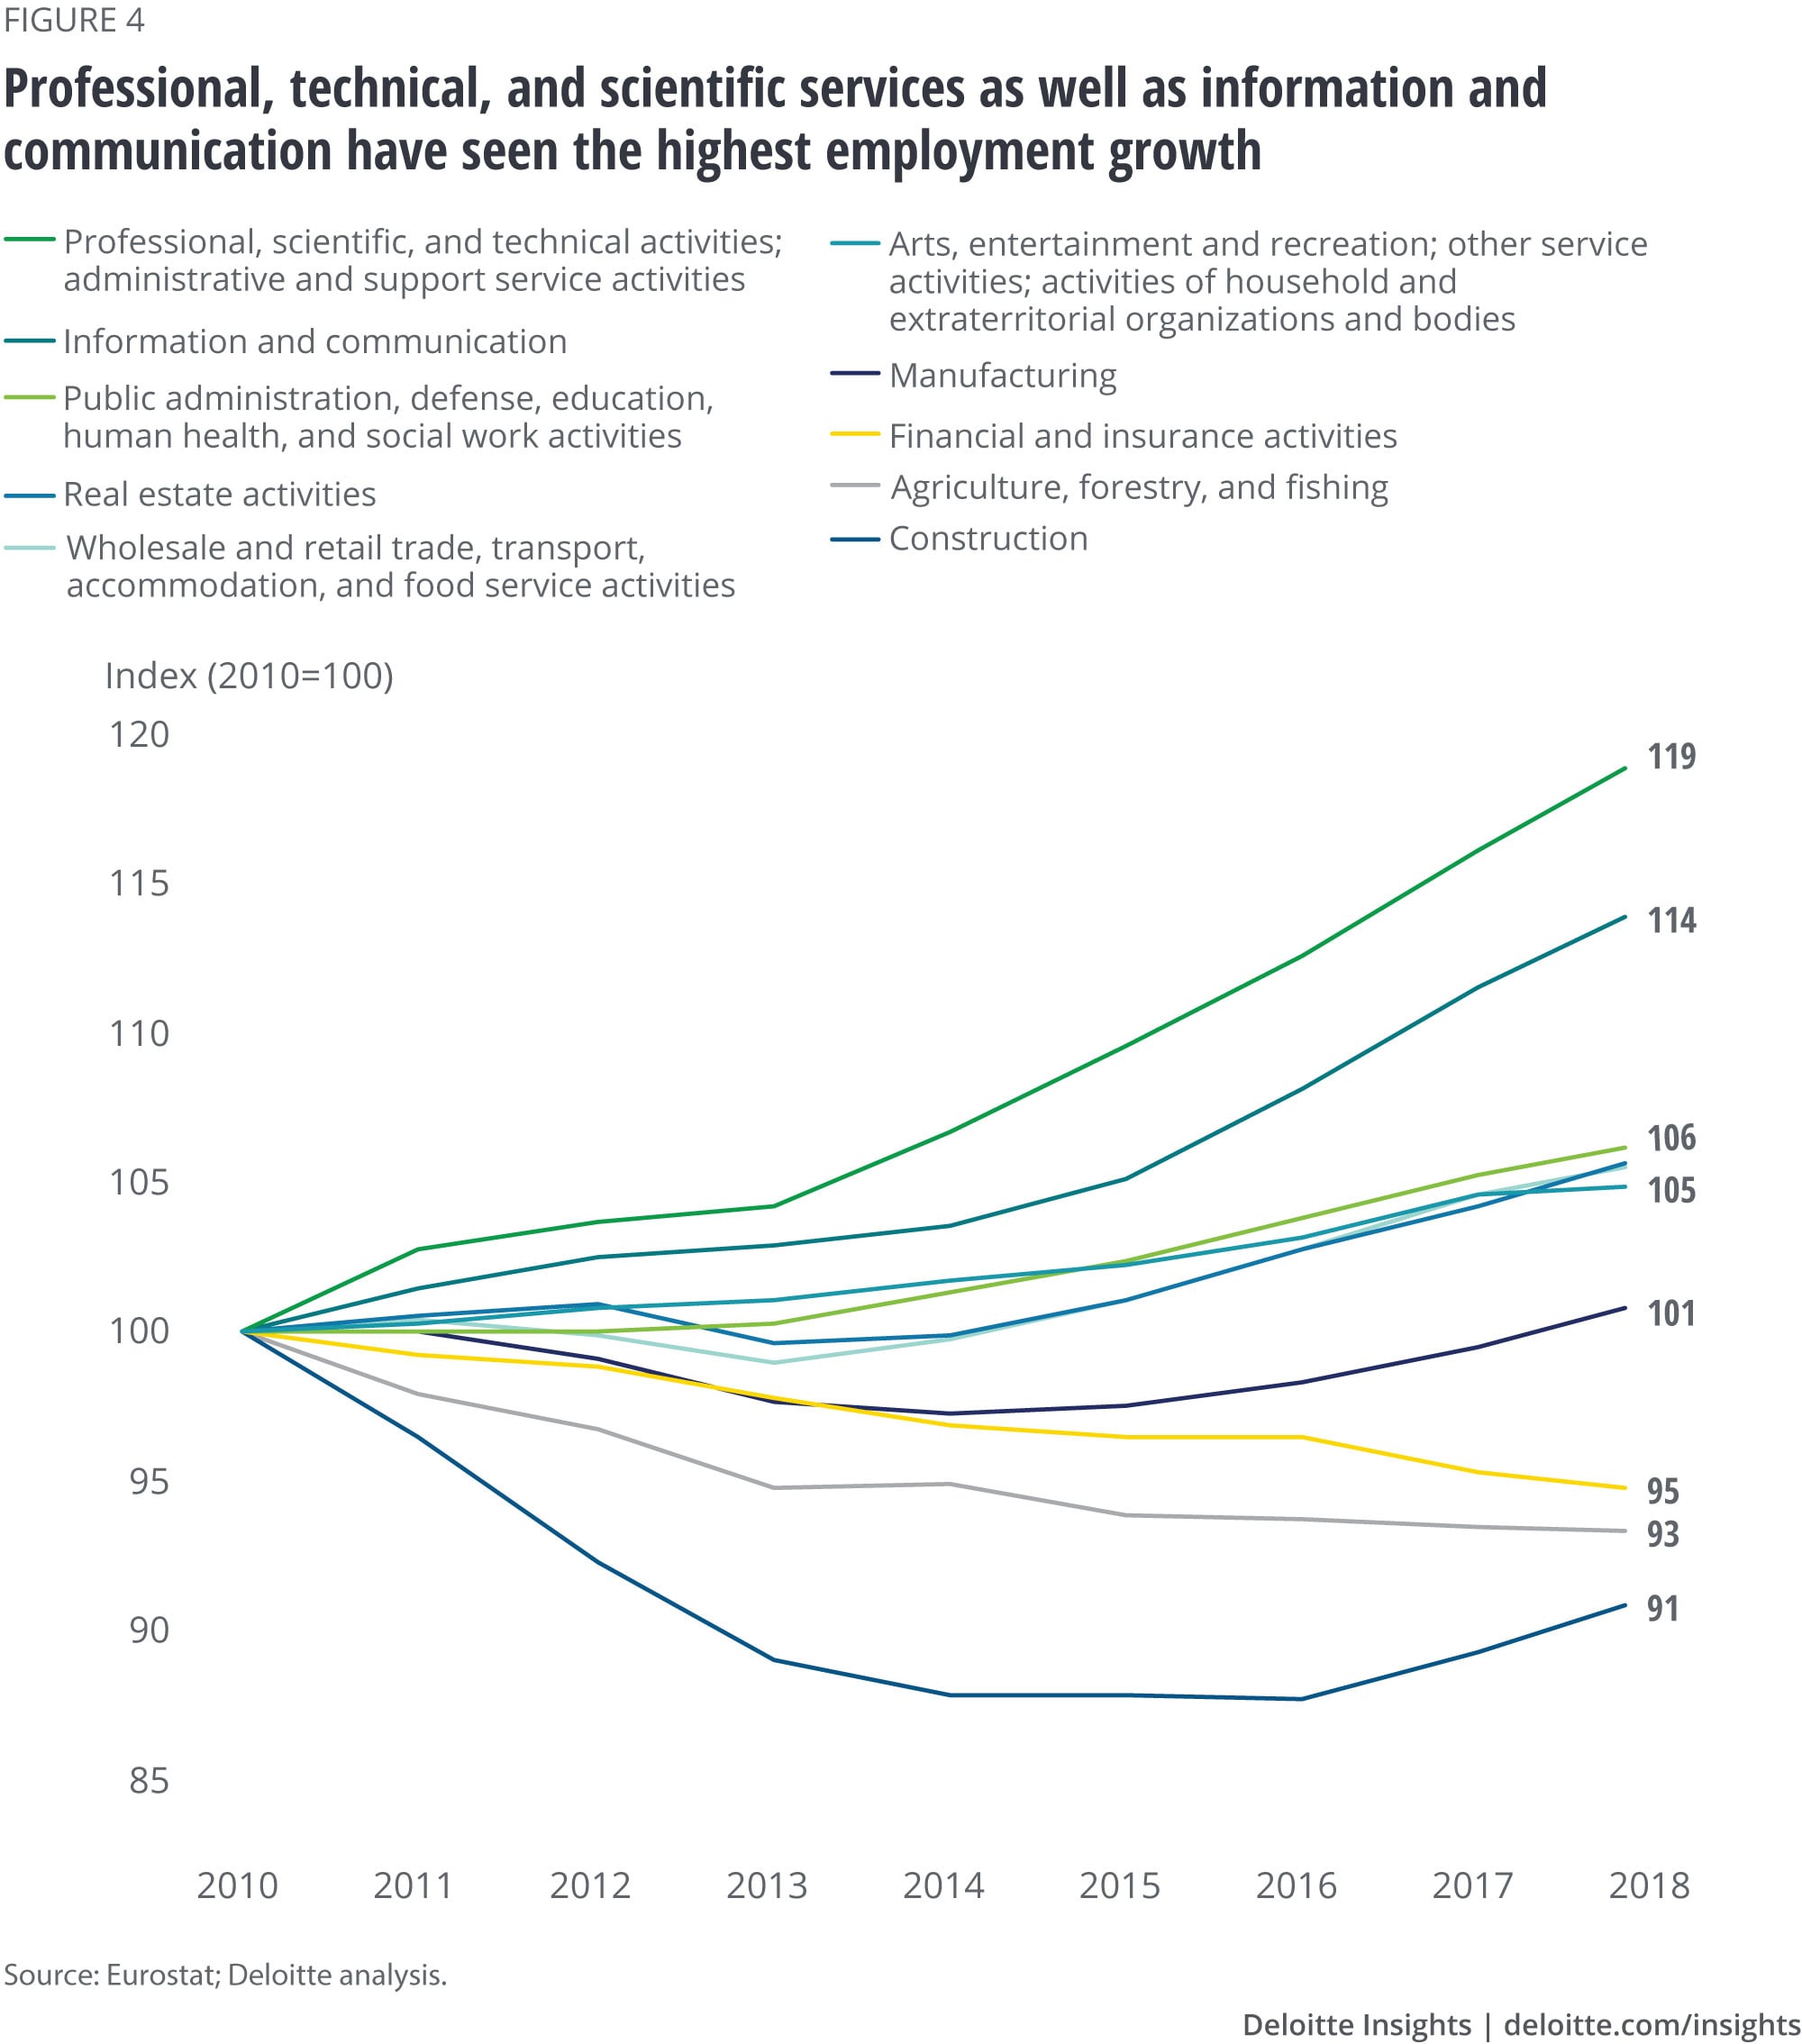 Professional, technical, and scientific services as well as information and communication have seen the highest employment growth